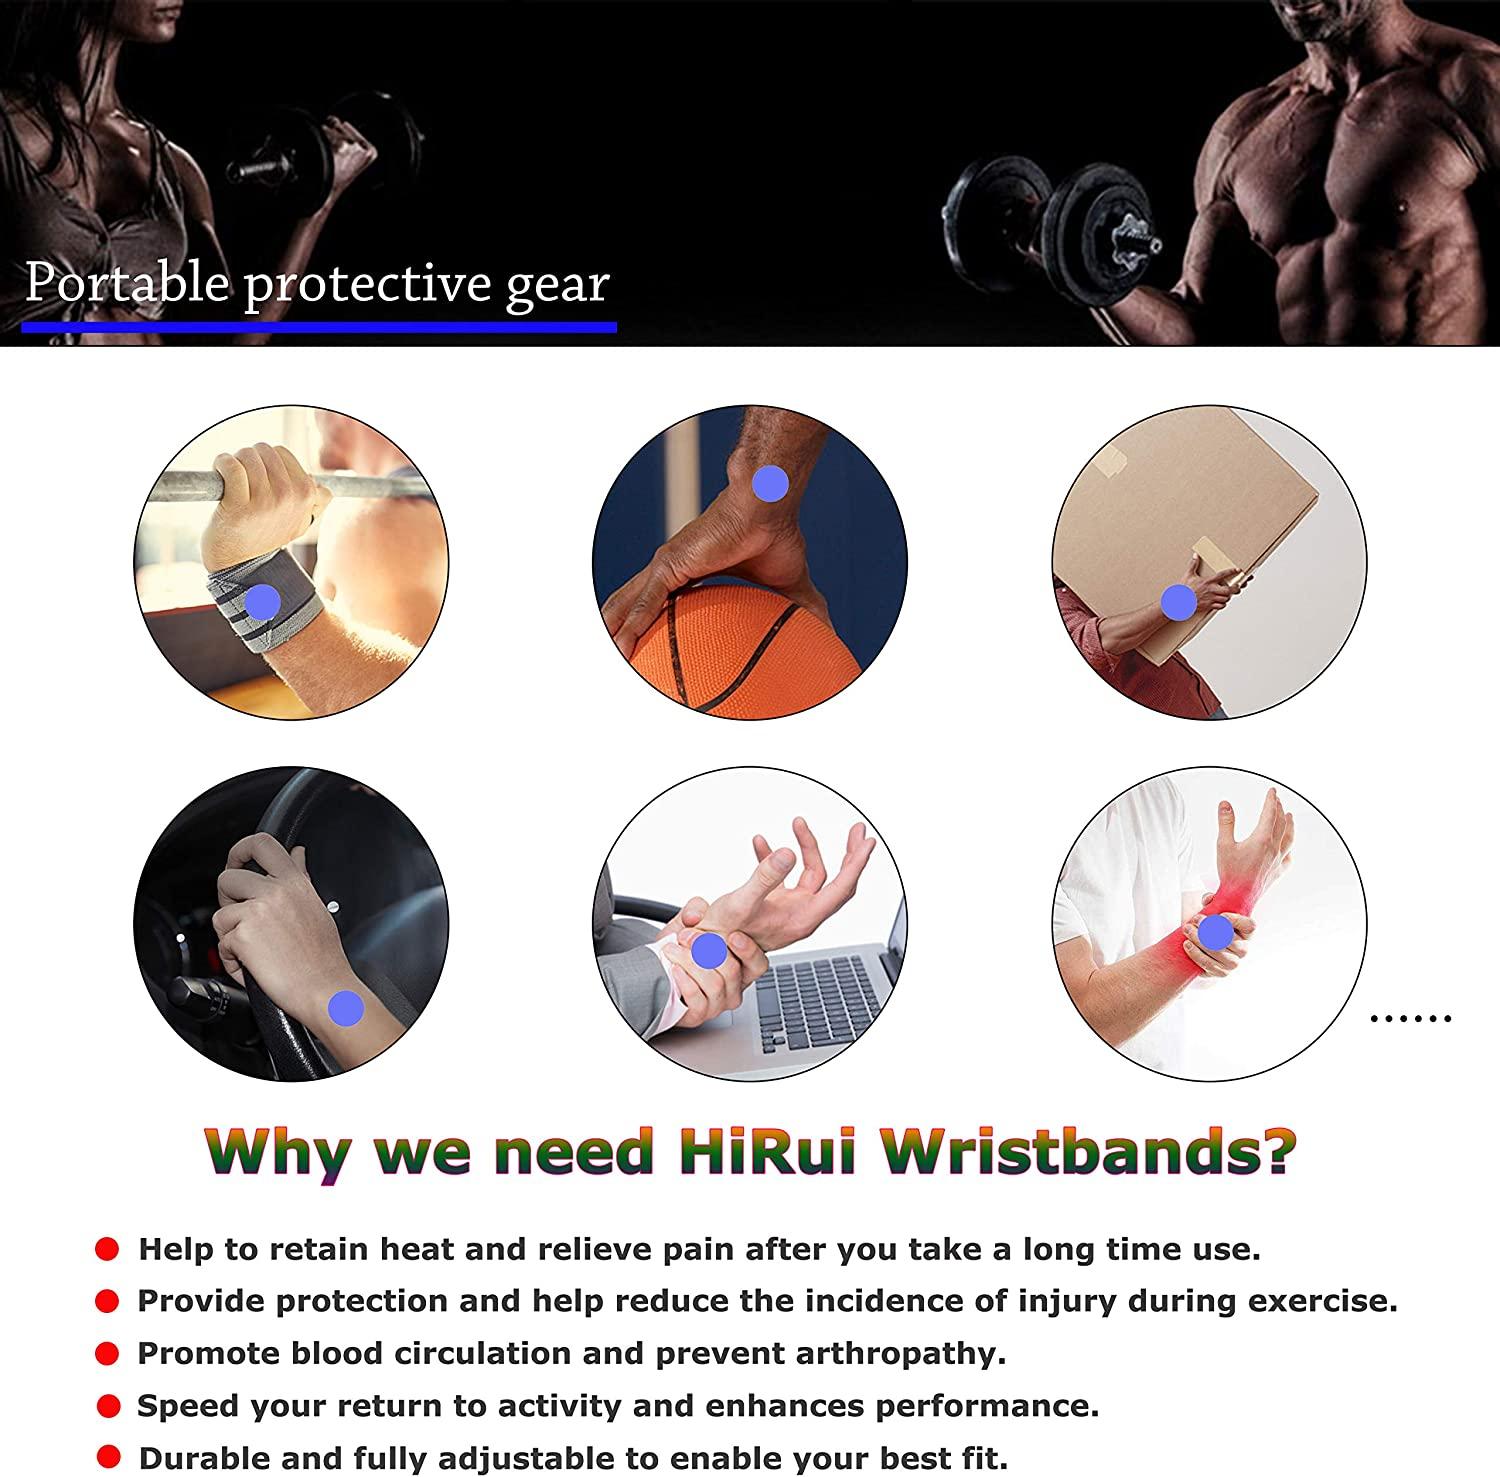 2 Pack Wrist Strap Brace for Work Out, Weightlifting, Tendonitis, Carpal  Tunnel Arthritis